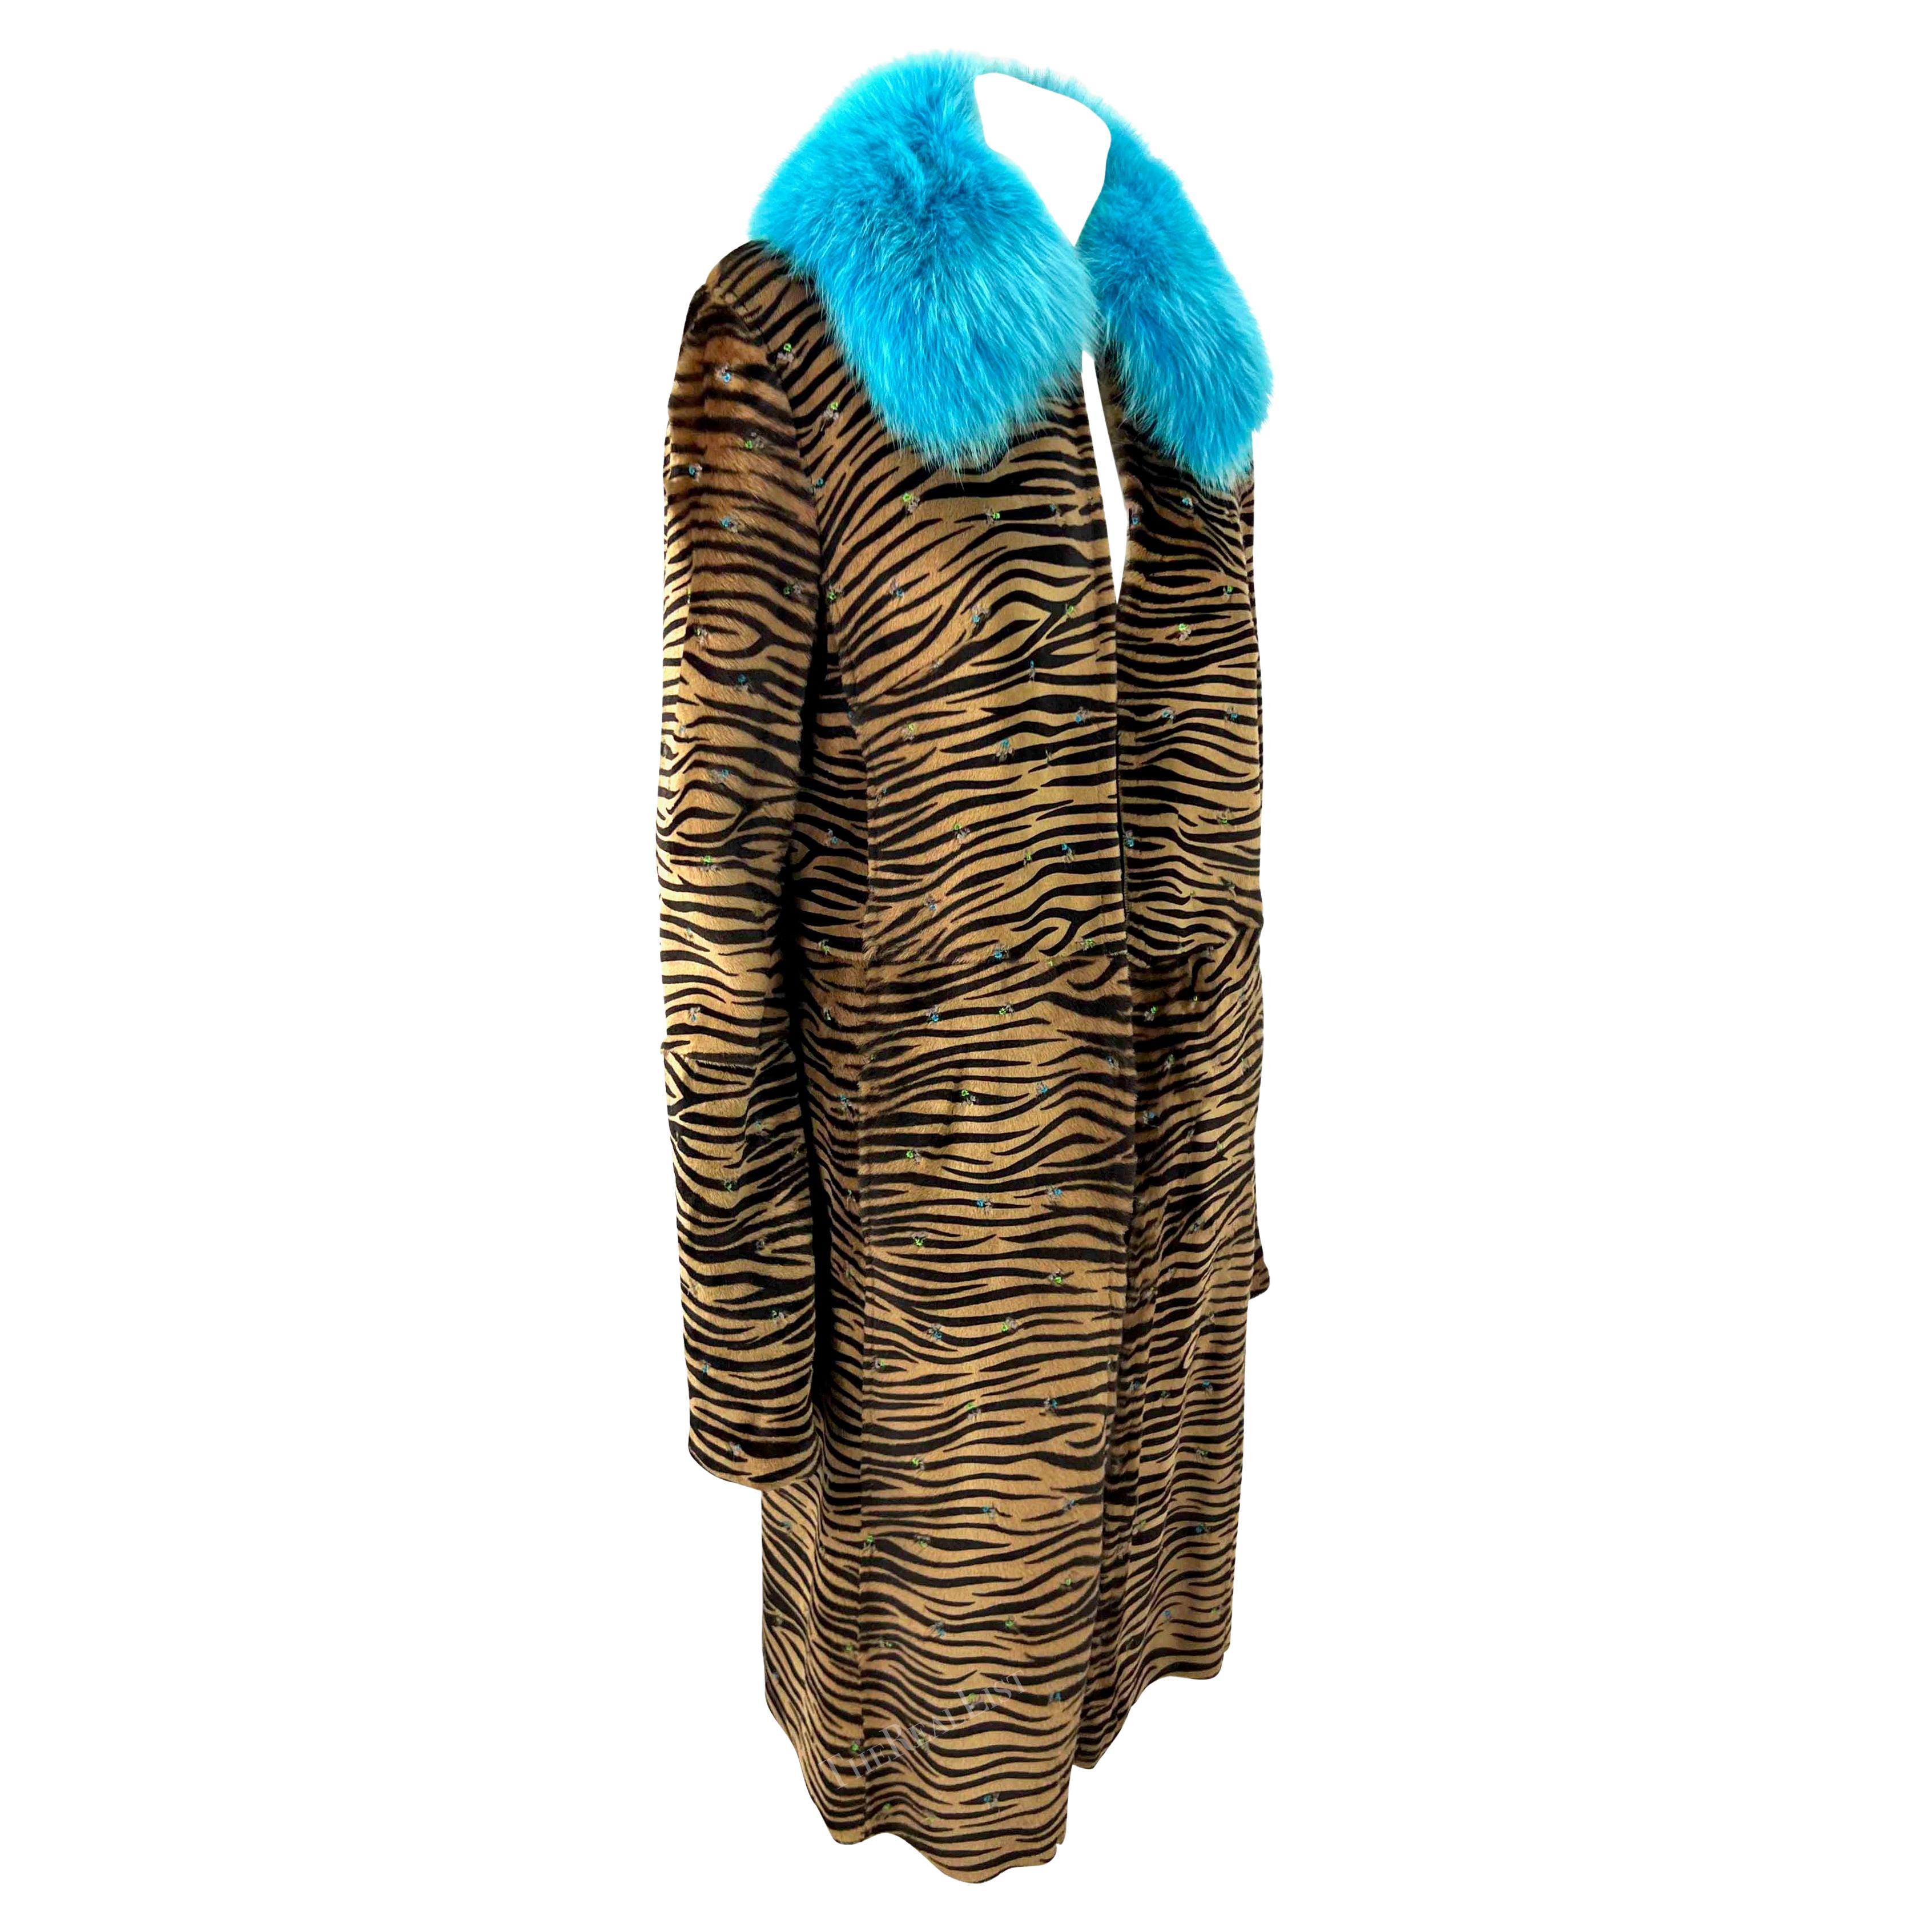 F/W 1999 Gianni Versace by Donatella Embroidered Pony Hair Blue Fox Fur Coat For Sale 9